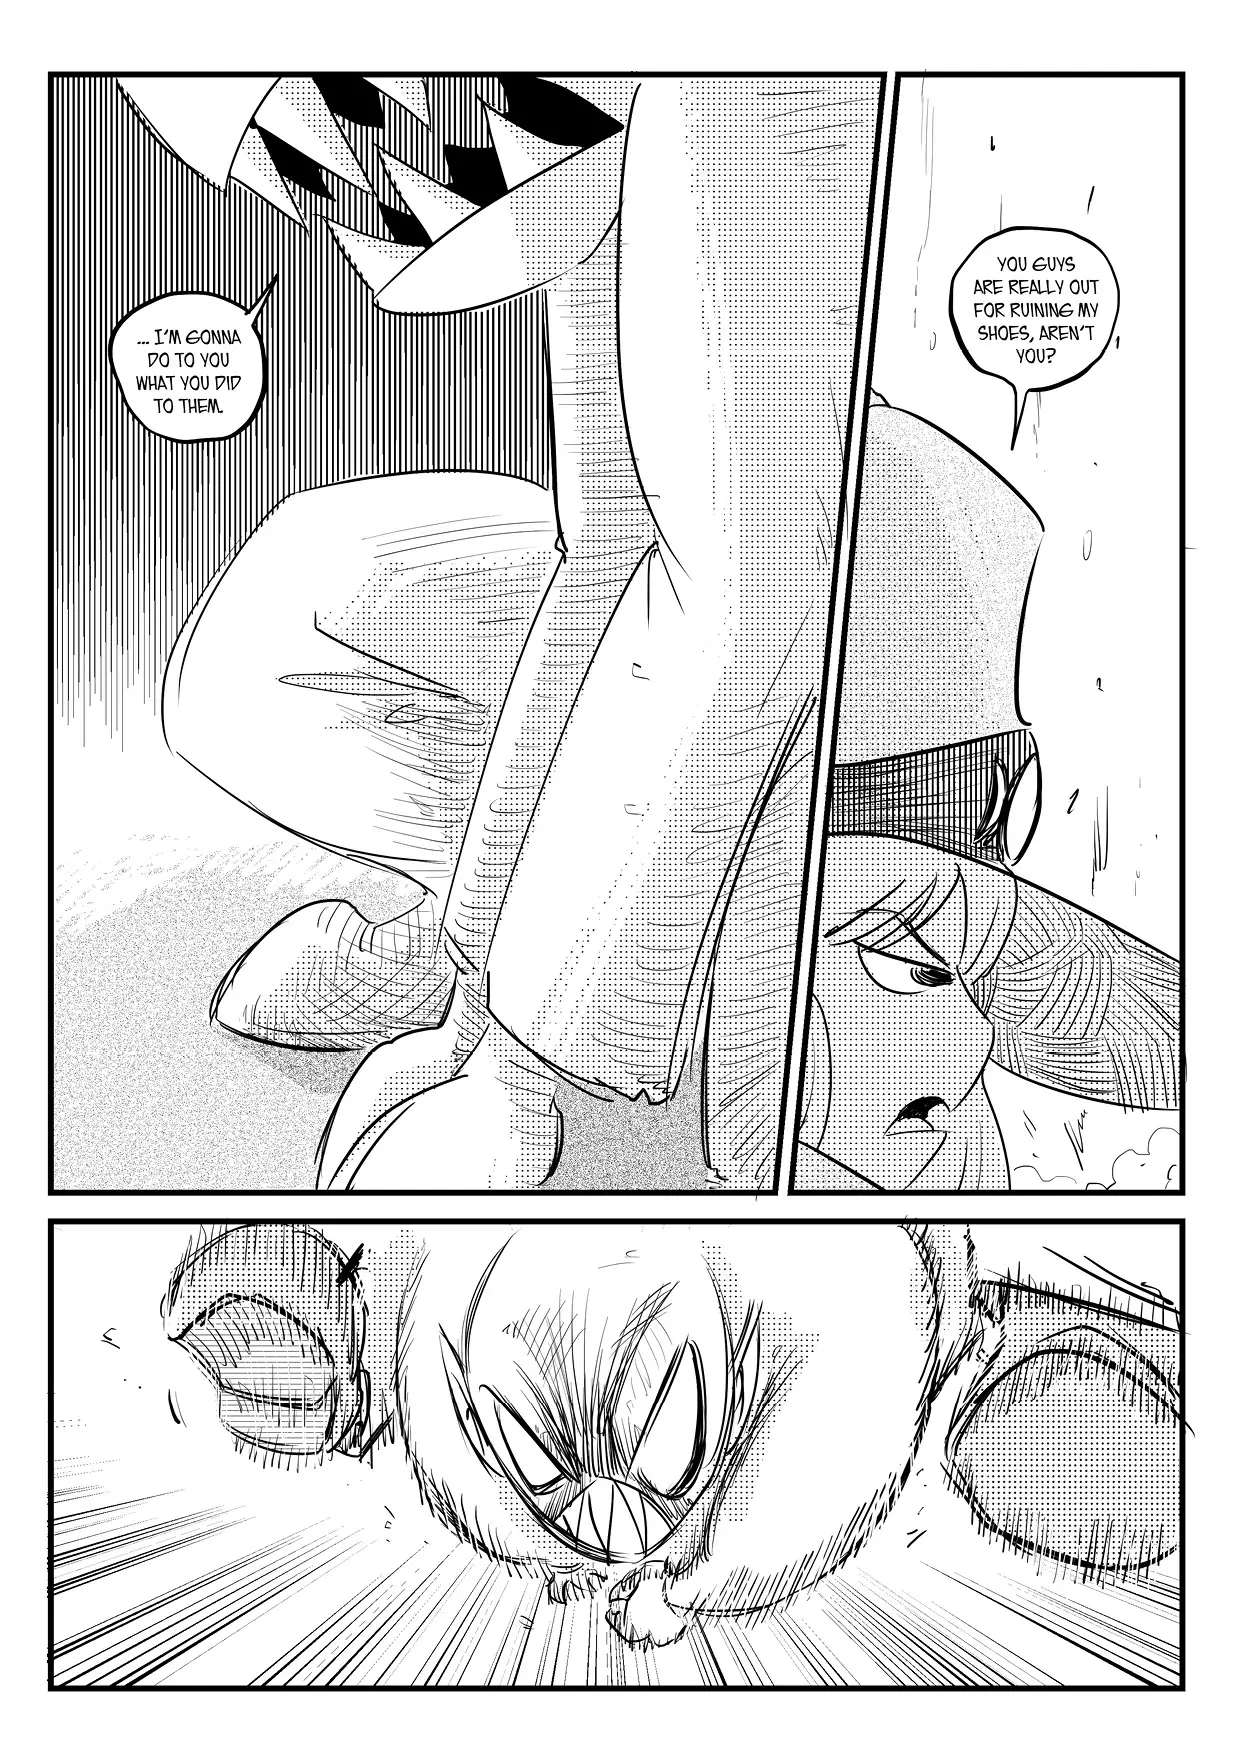 Witches' Quarter - 1 page 39-01ecf6ea